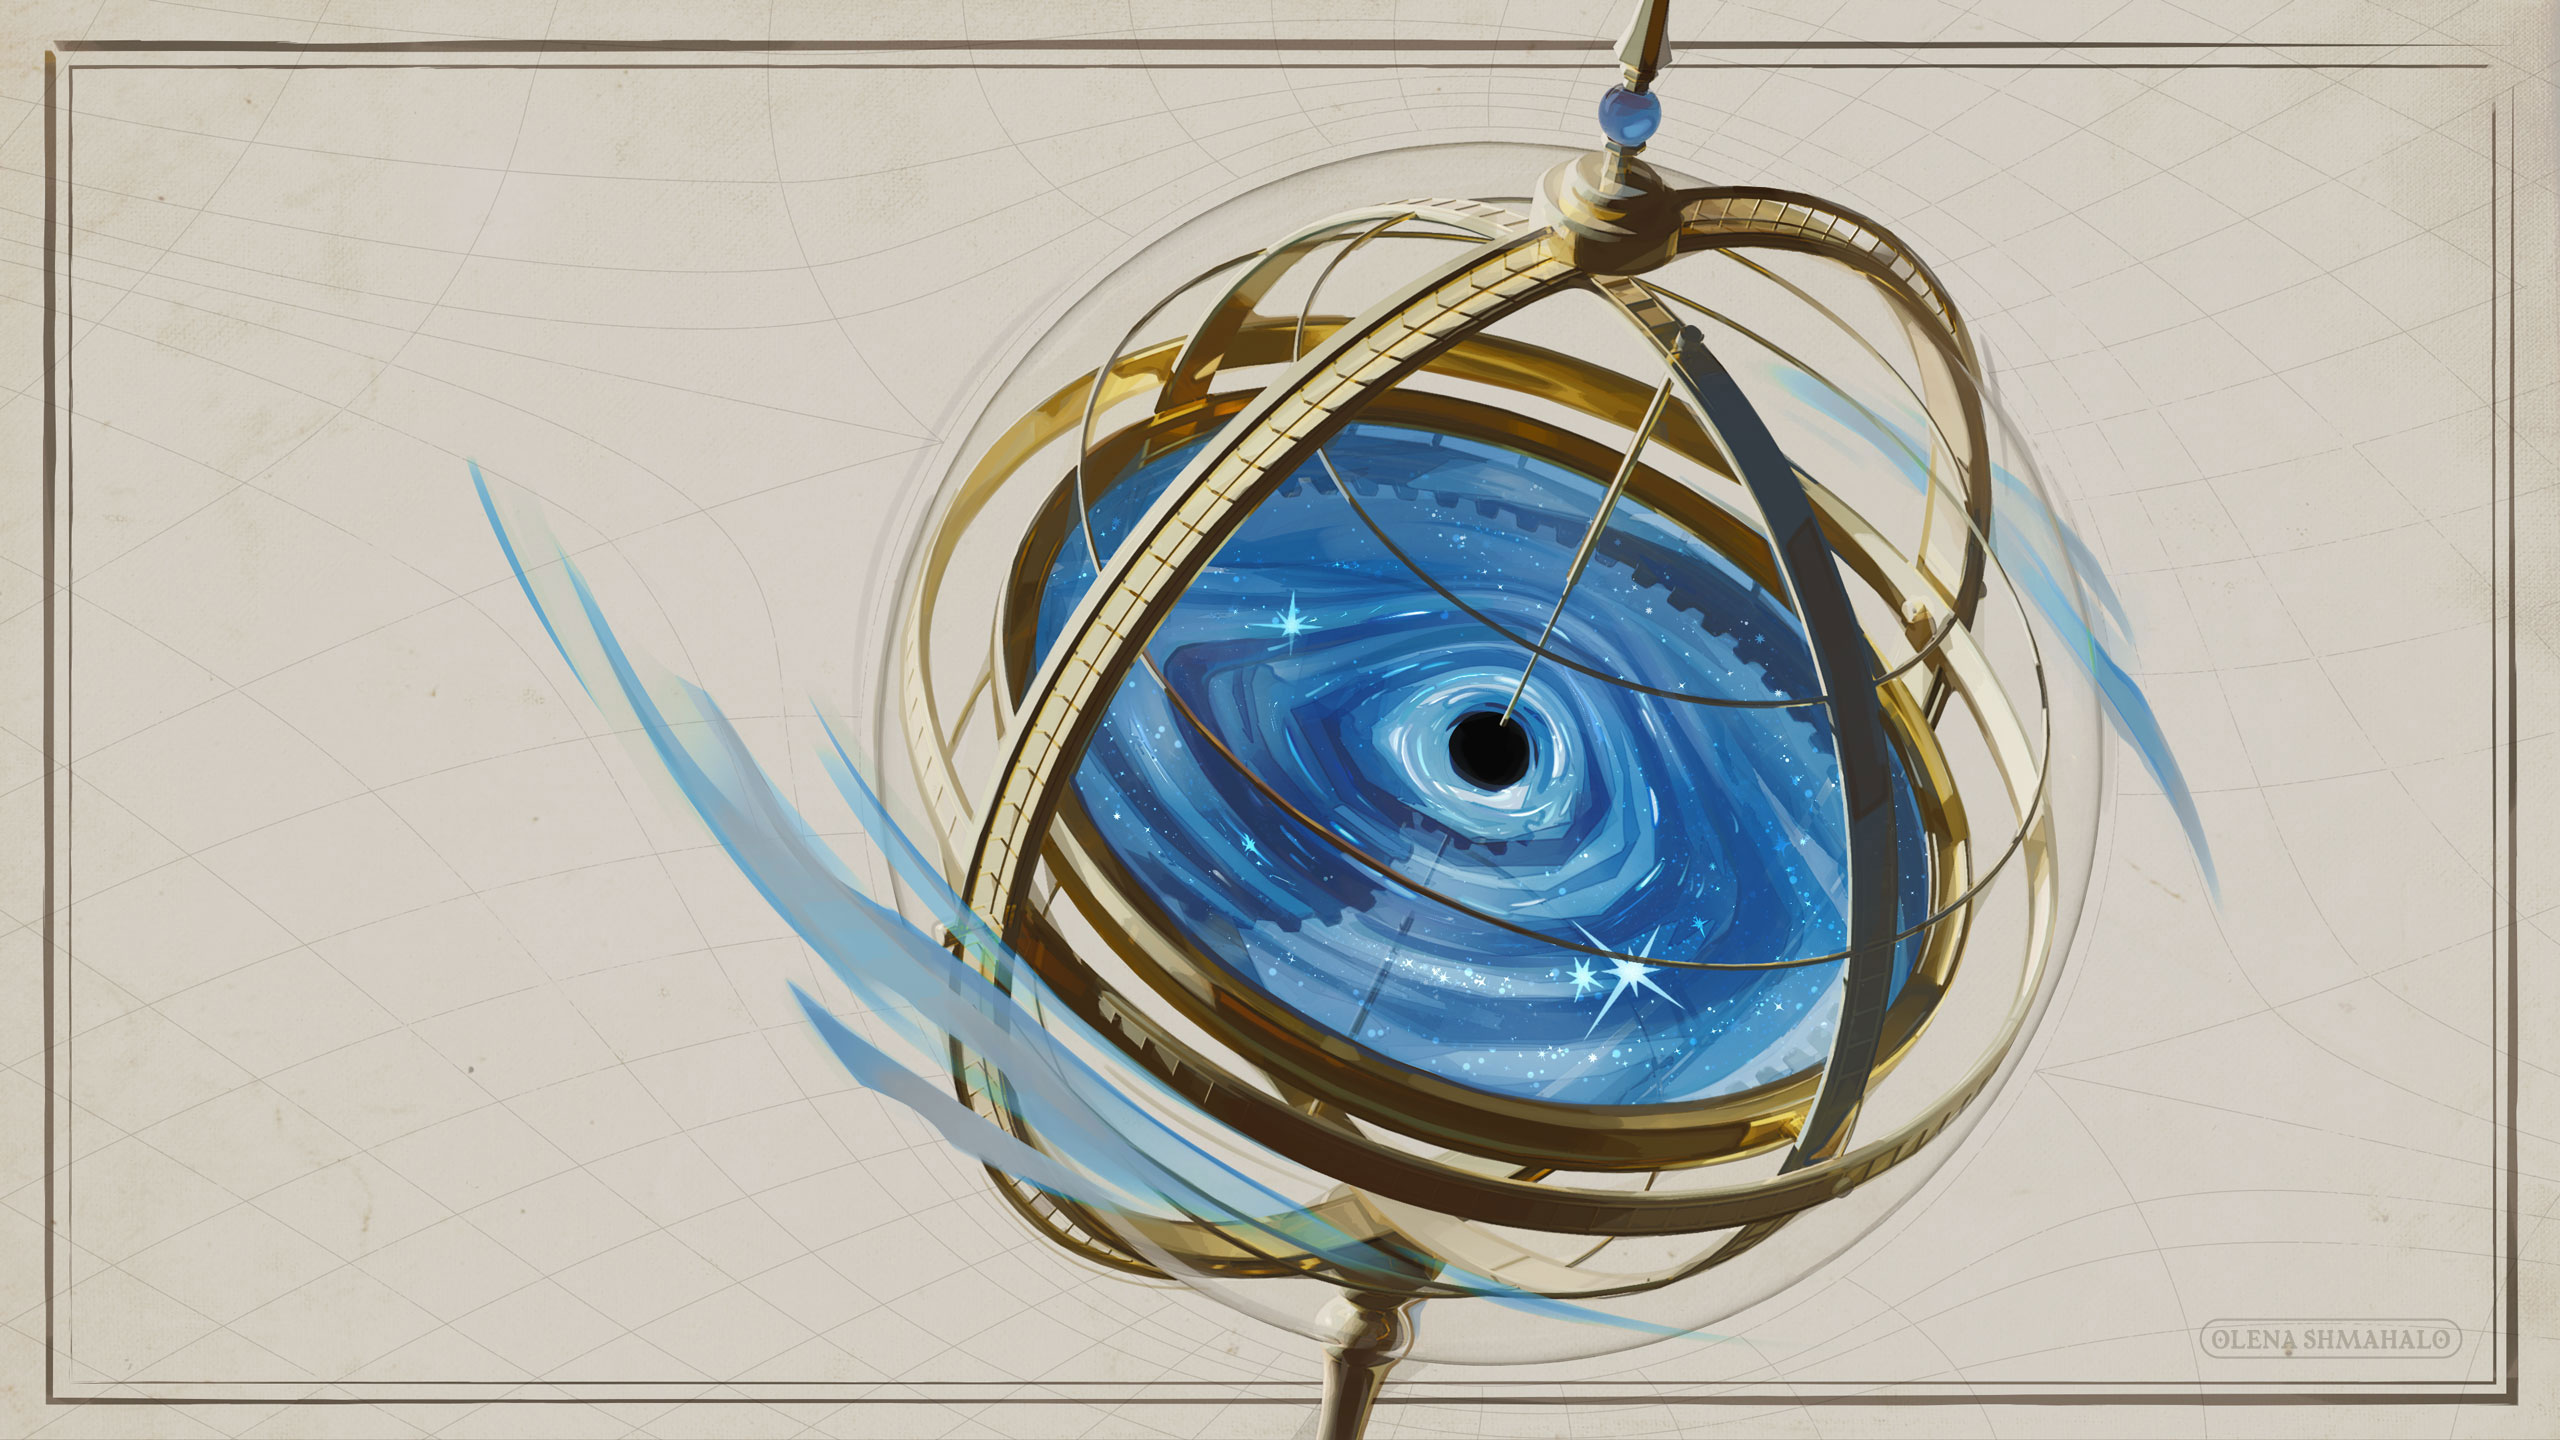 Painting of a gold armillary sphere on a beige background, containing a blue galaxy and a spherical black hole at its center. Gears are faintly visible beneath the galaxy.